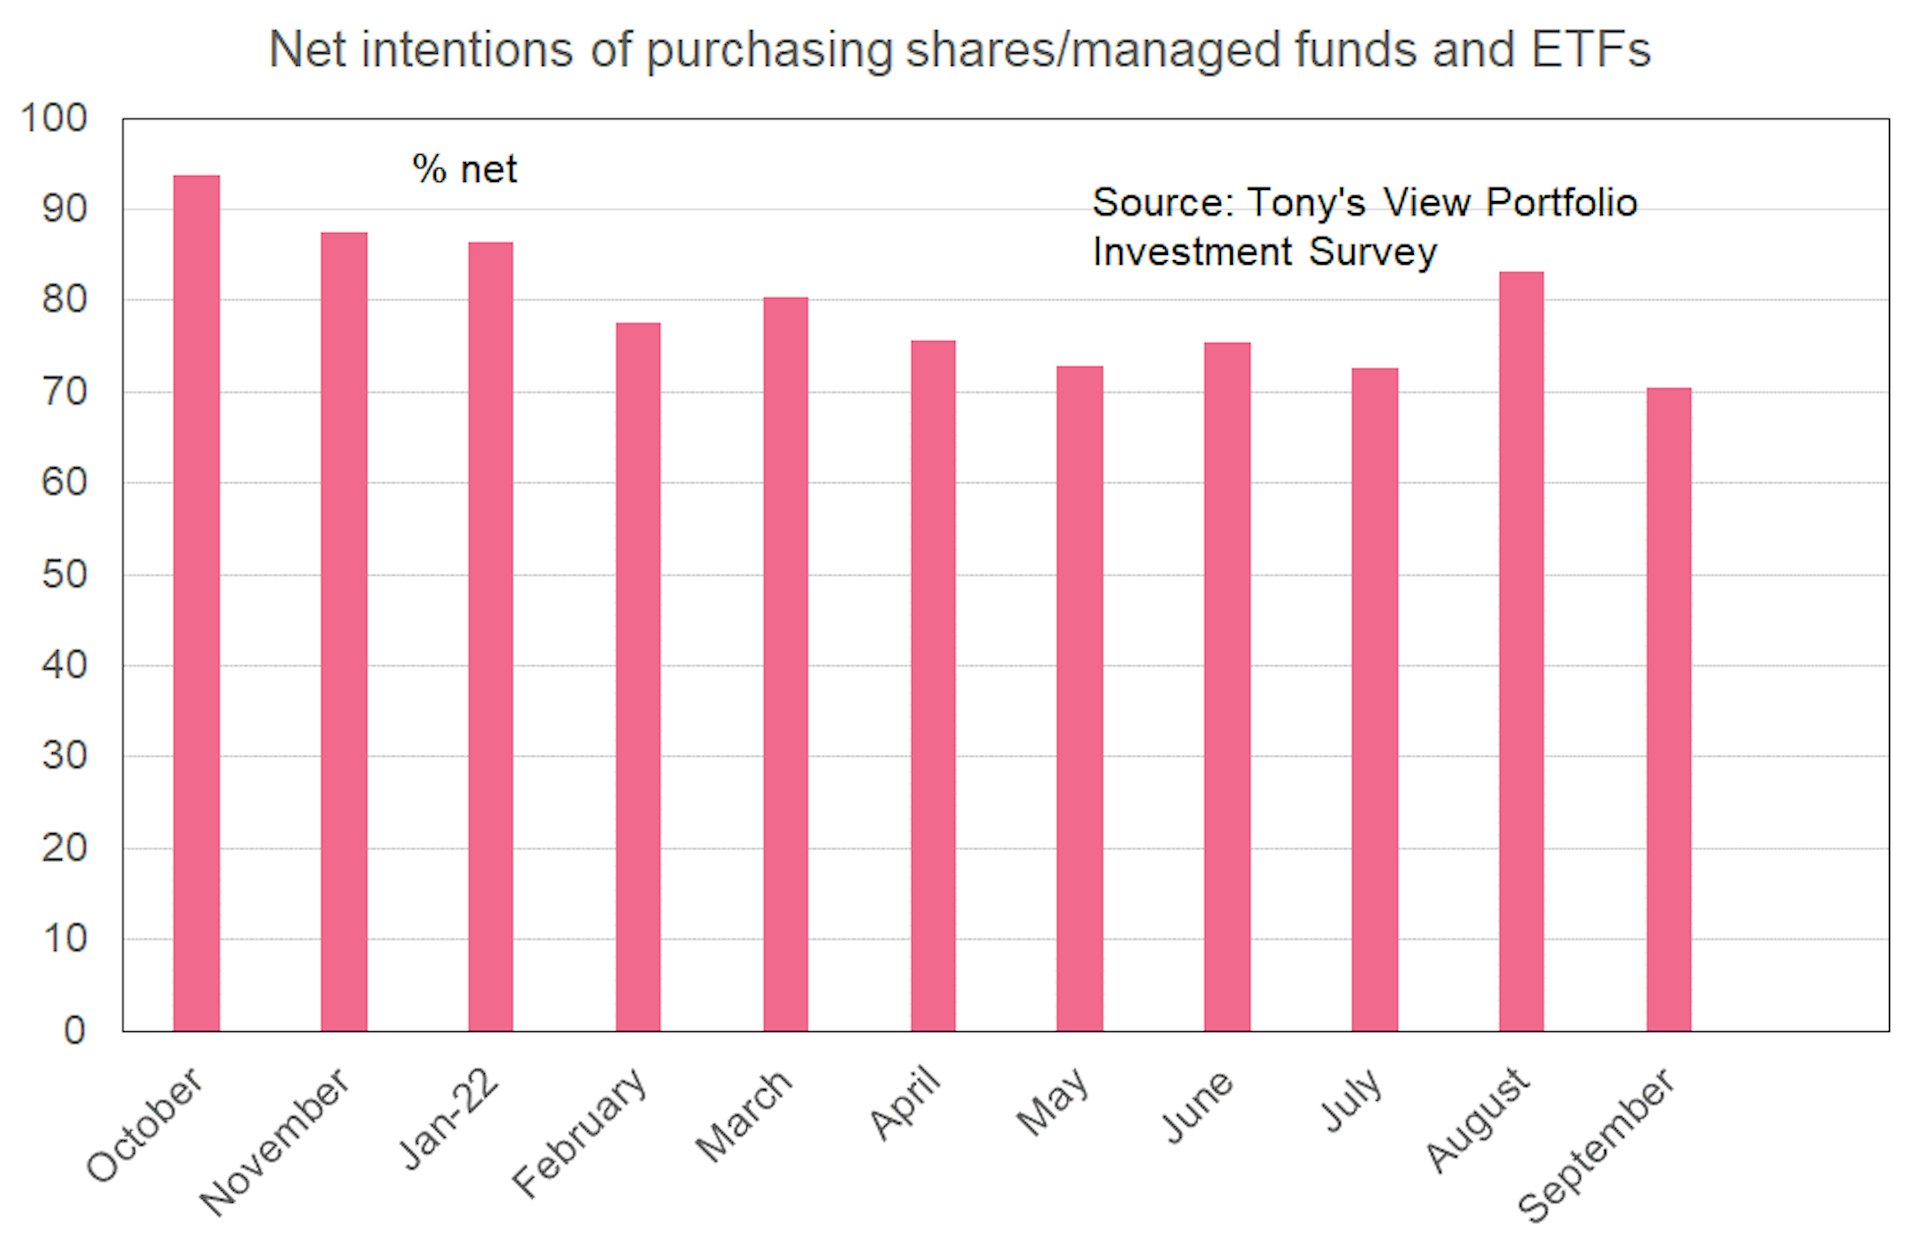 Bar graph showing net intentions of purchasing shares/managed funds and exchange-traded funds falling from a recent peak of 82% in August to 70% in September. 